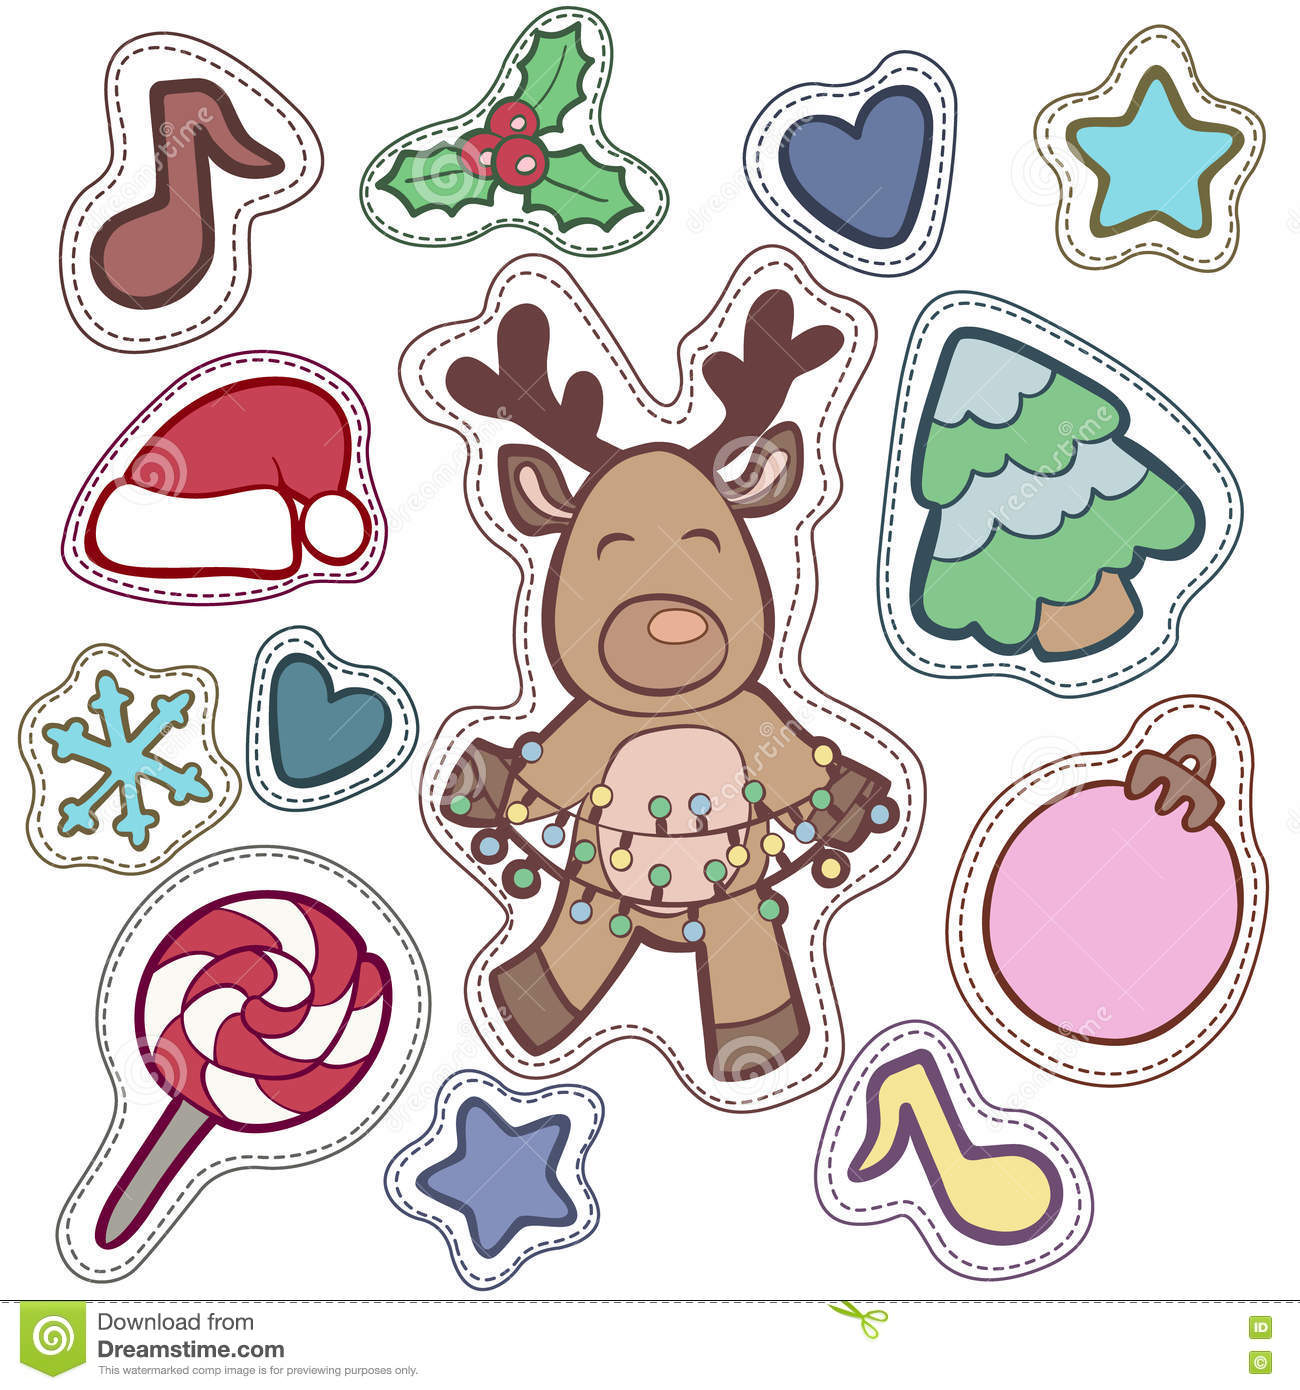 Christmas And Happy New Year Patch Badges With Santa, Deer, Snow.